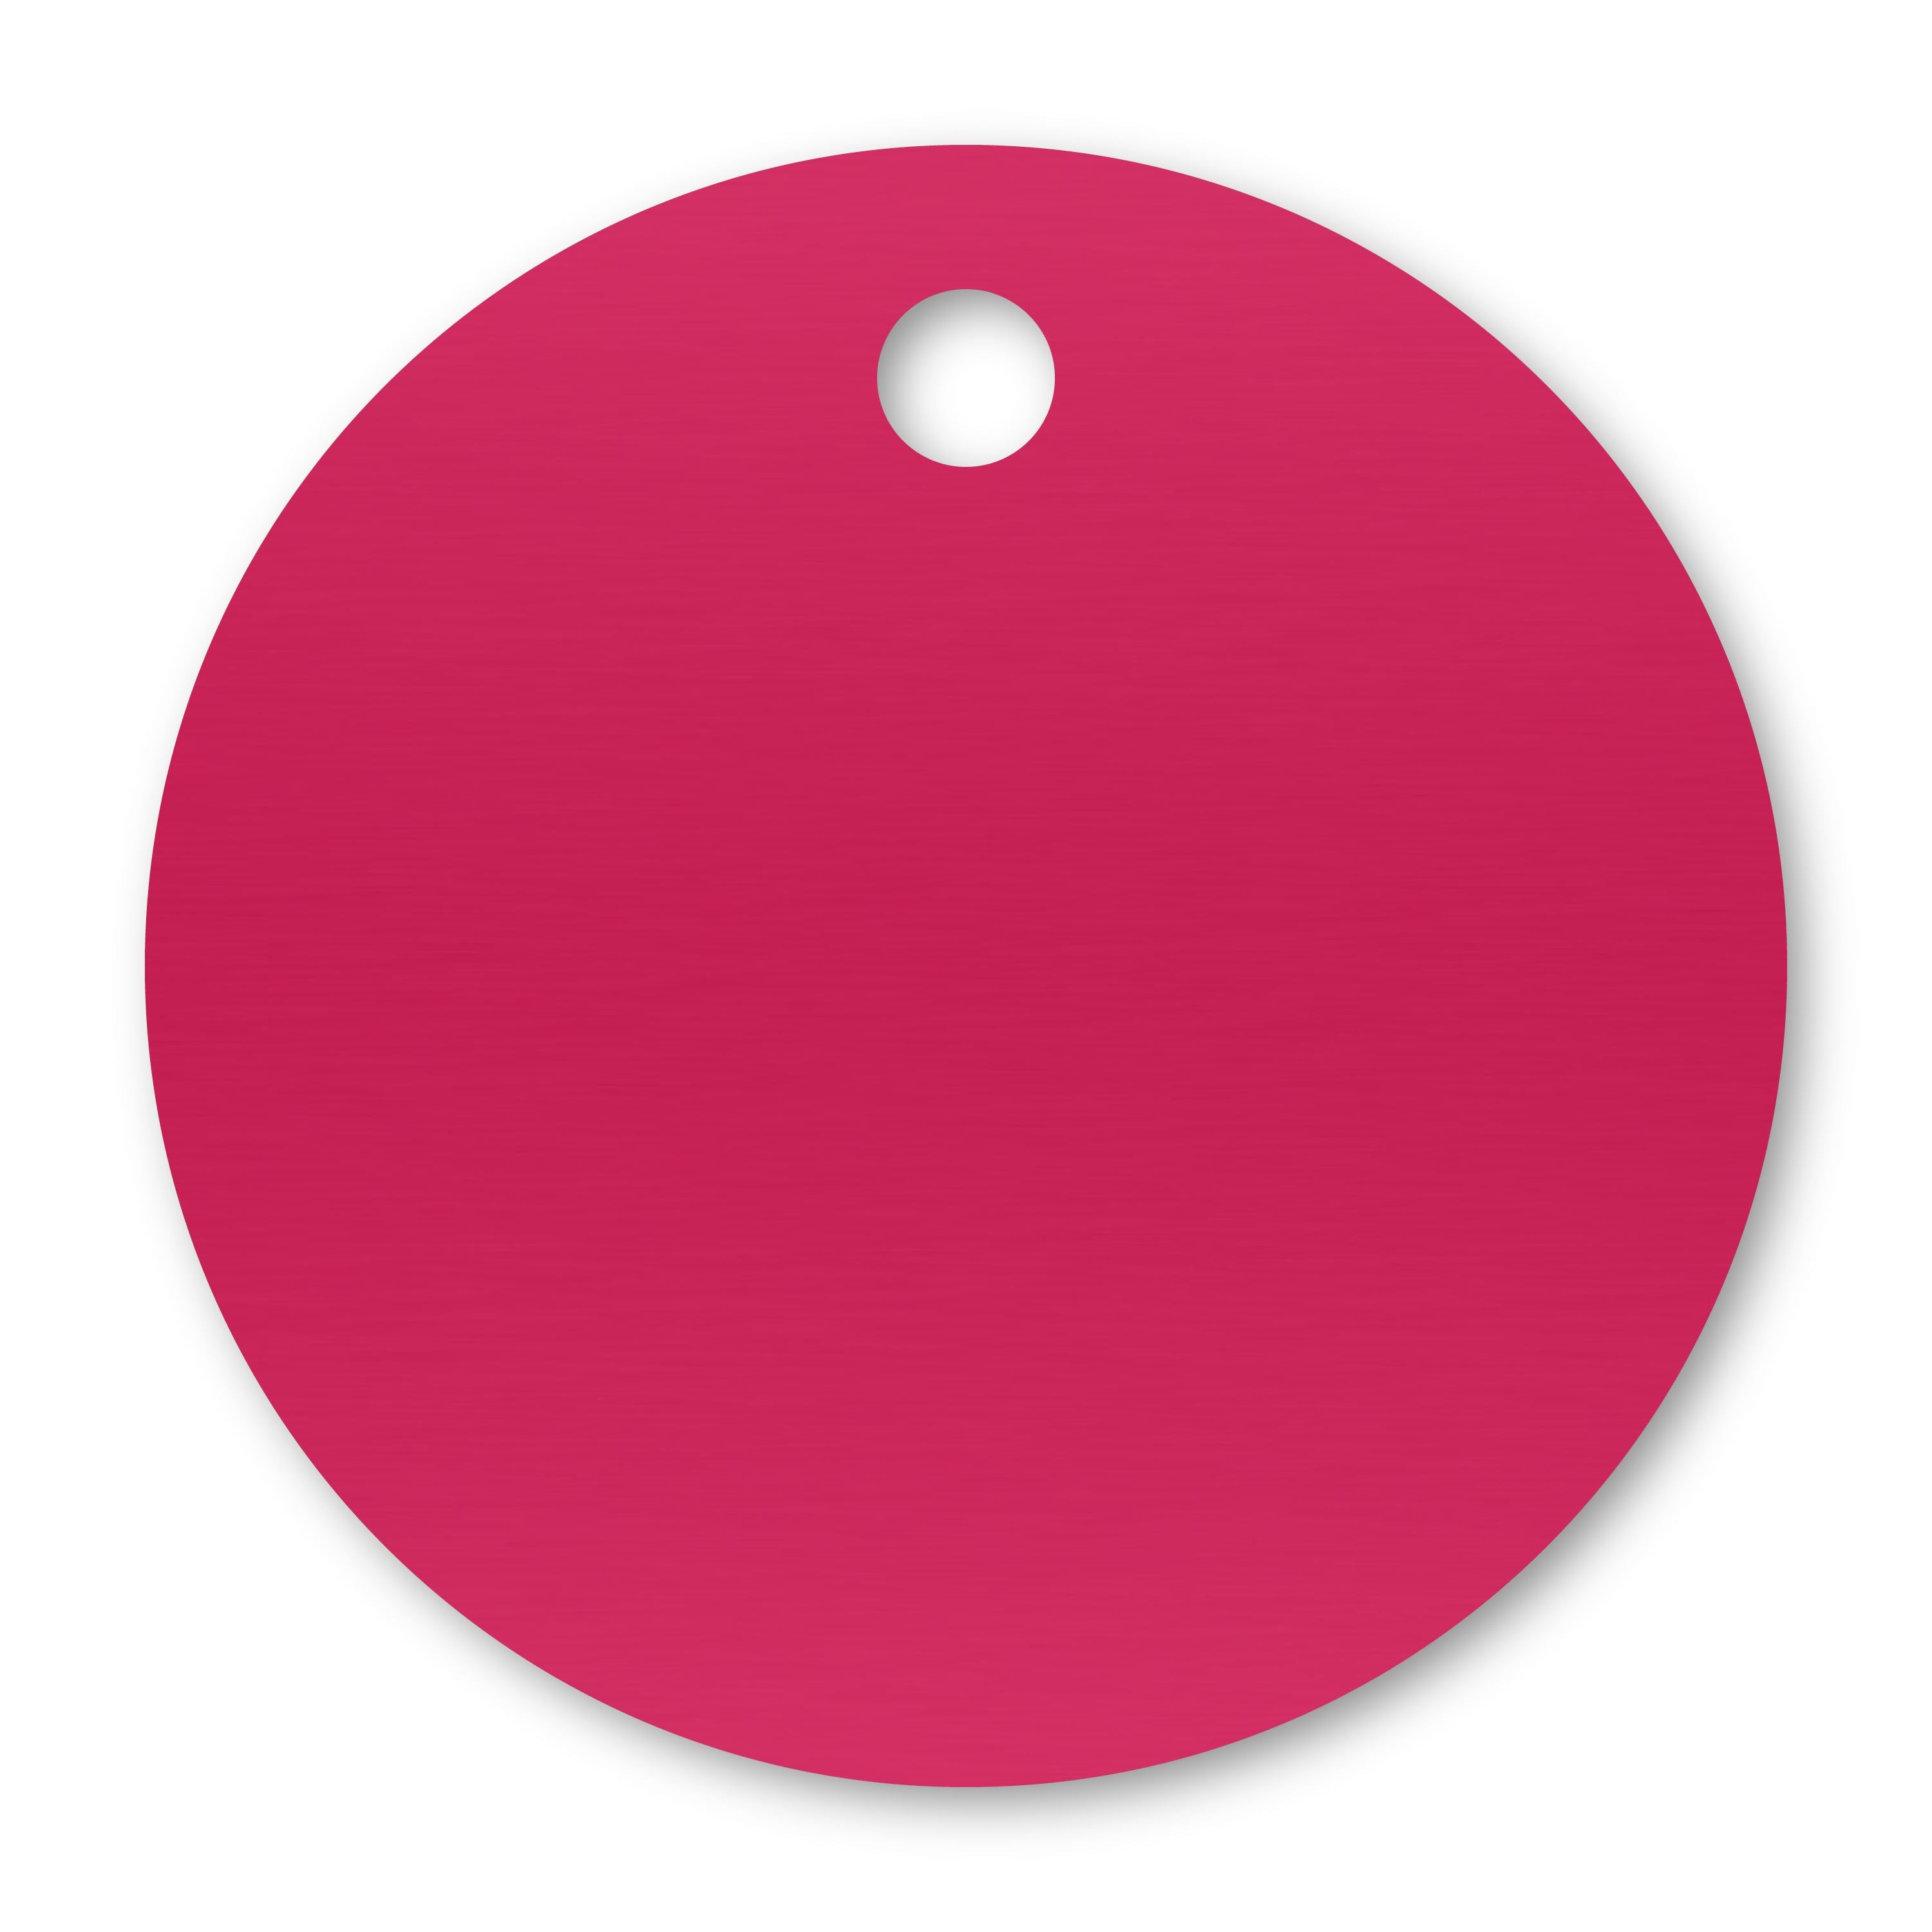 Anodized Aluminum Round Tags, 1-1/4" with 1/8" Hole, Laser Engraved Metal Tags Craftworks NW Pink 